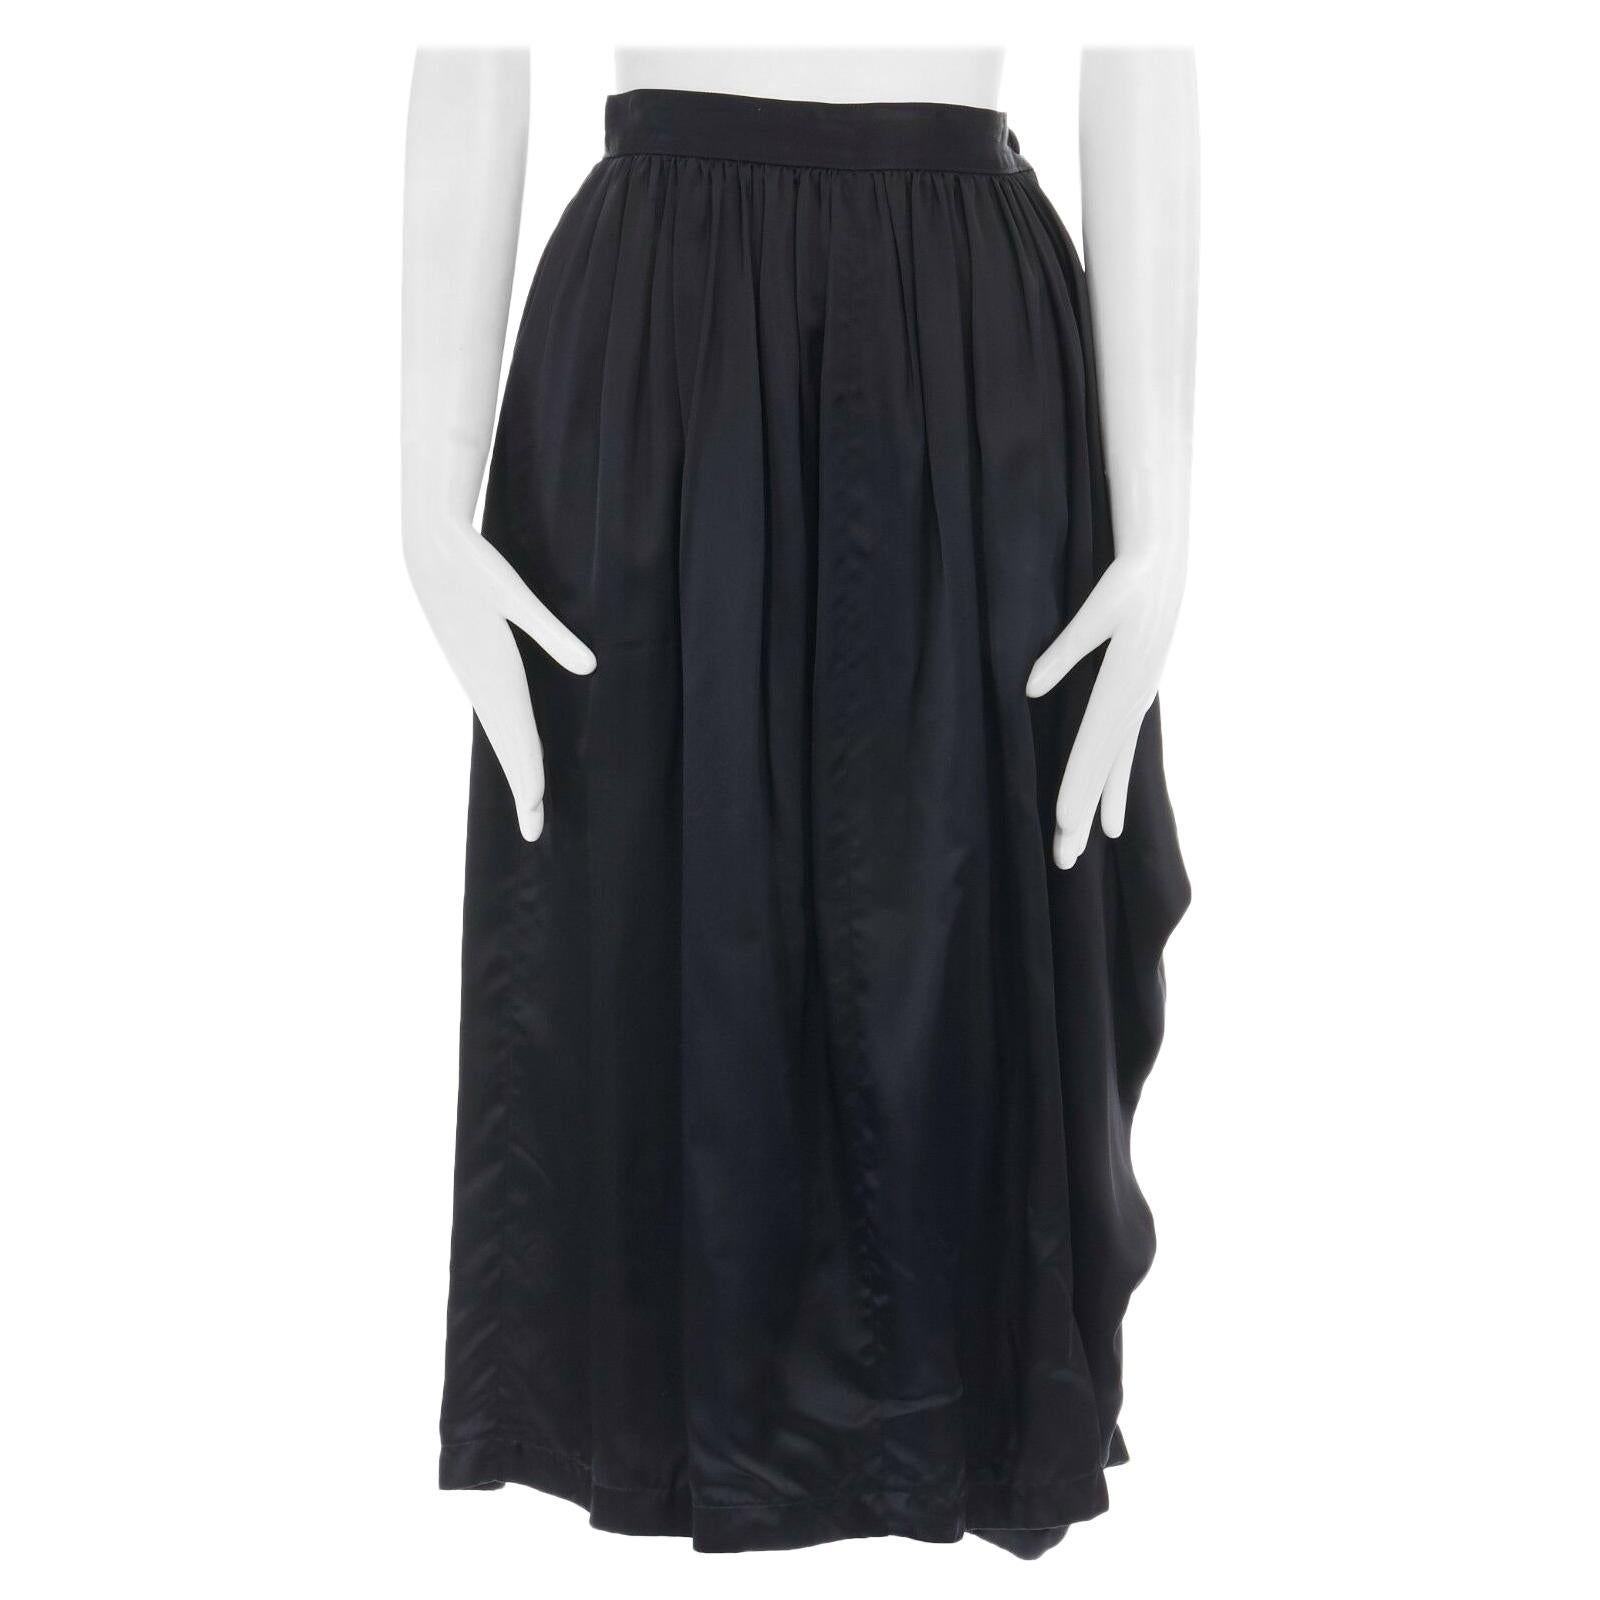 COMME DES GARCONS AD1989 black rayon draped knee length skirt S 24"